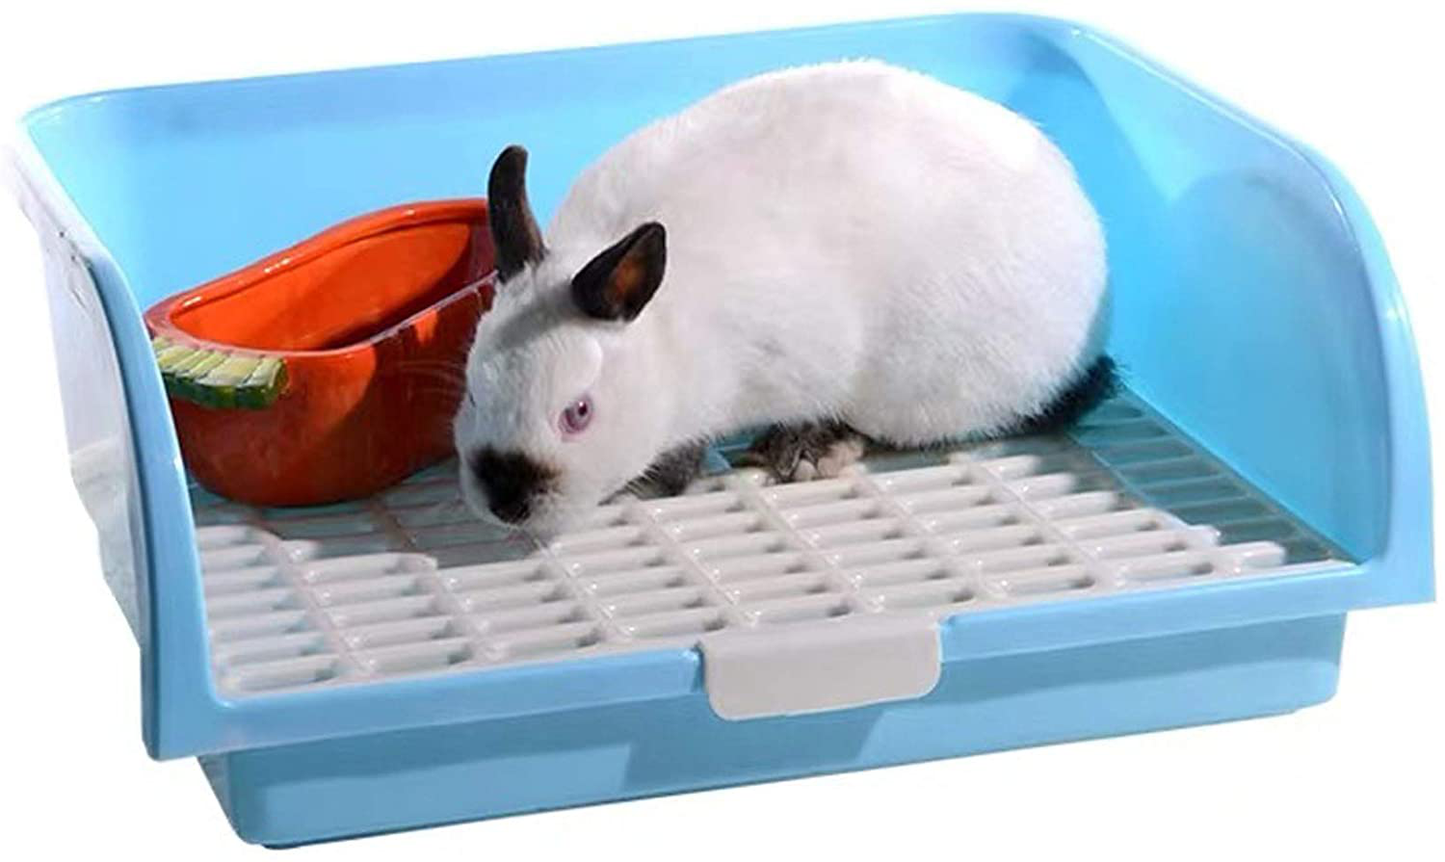 Hamiledyi Large Rabbit Litter Box Corner Bedding Box Chinchilla Toilet Trainer Square Potty Pet Pan for Adult Guinea Pig, Galesaur.Ferret and Other Animals